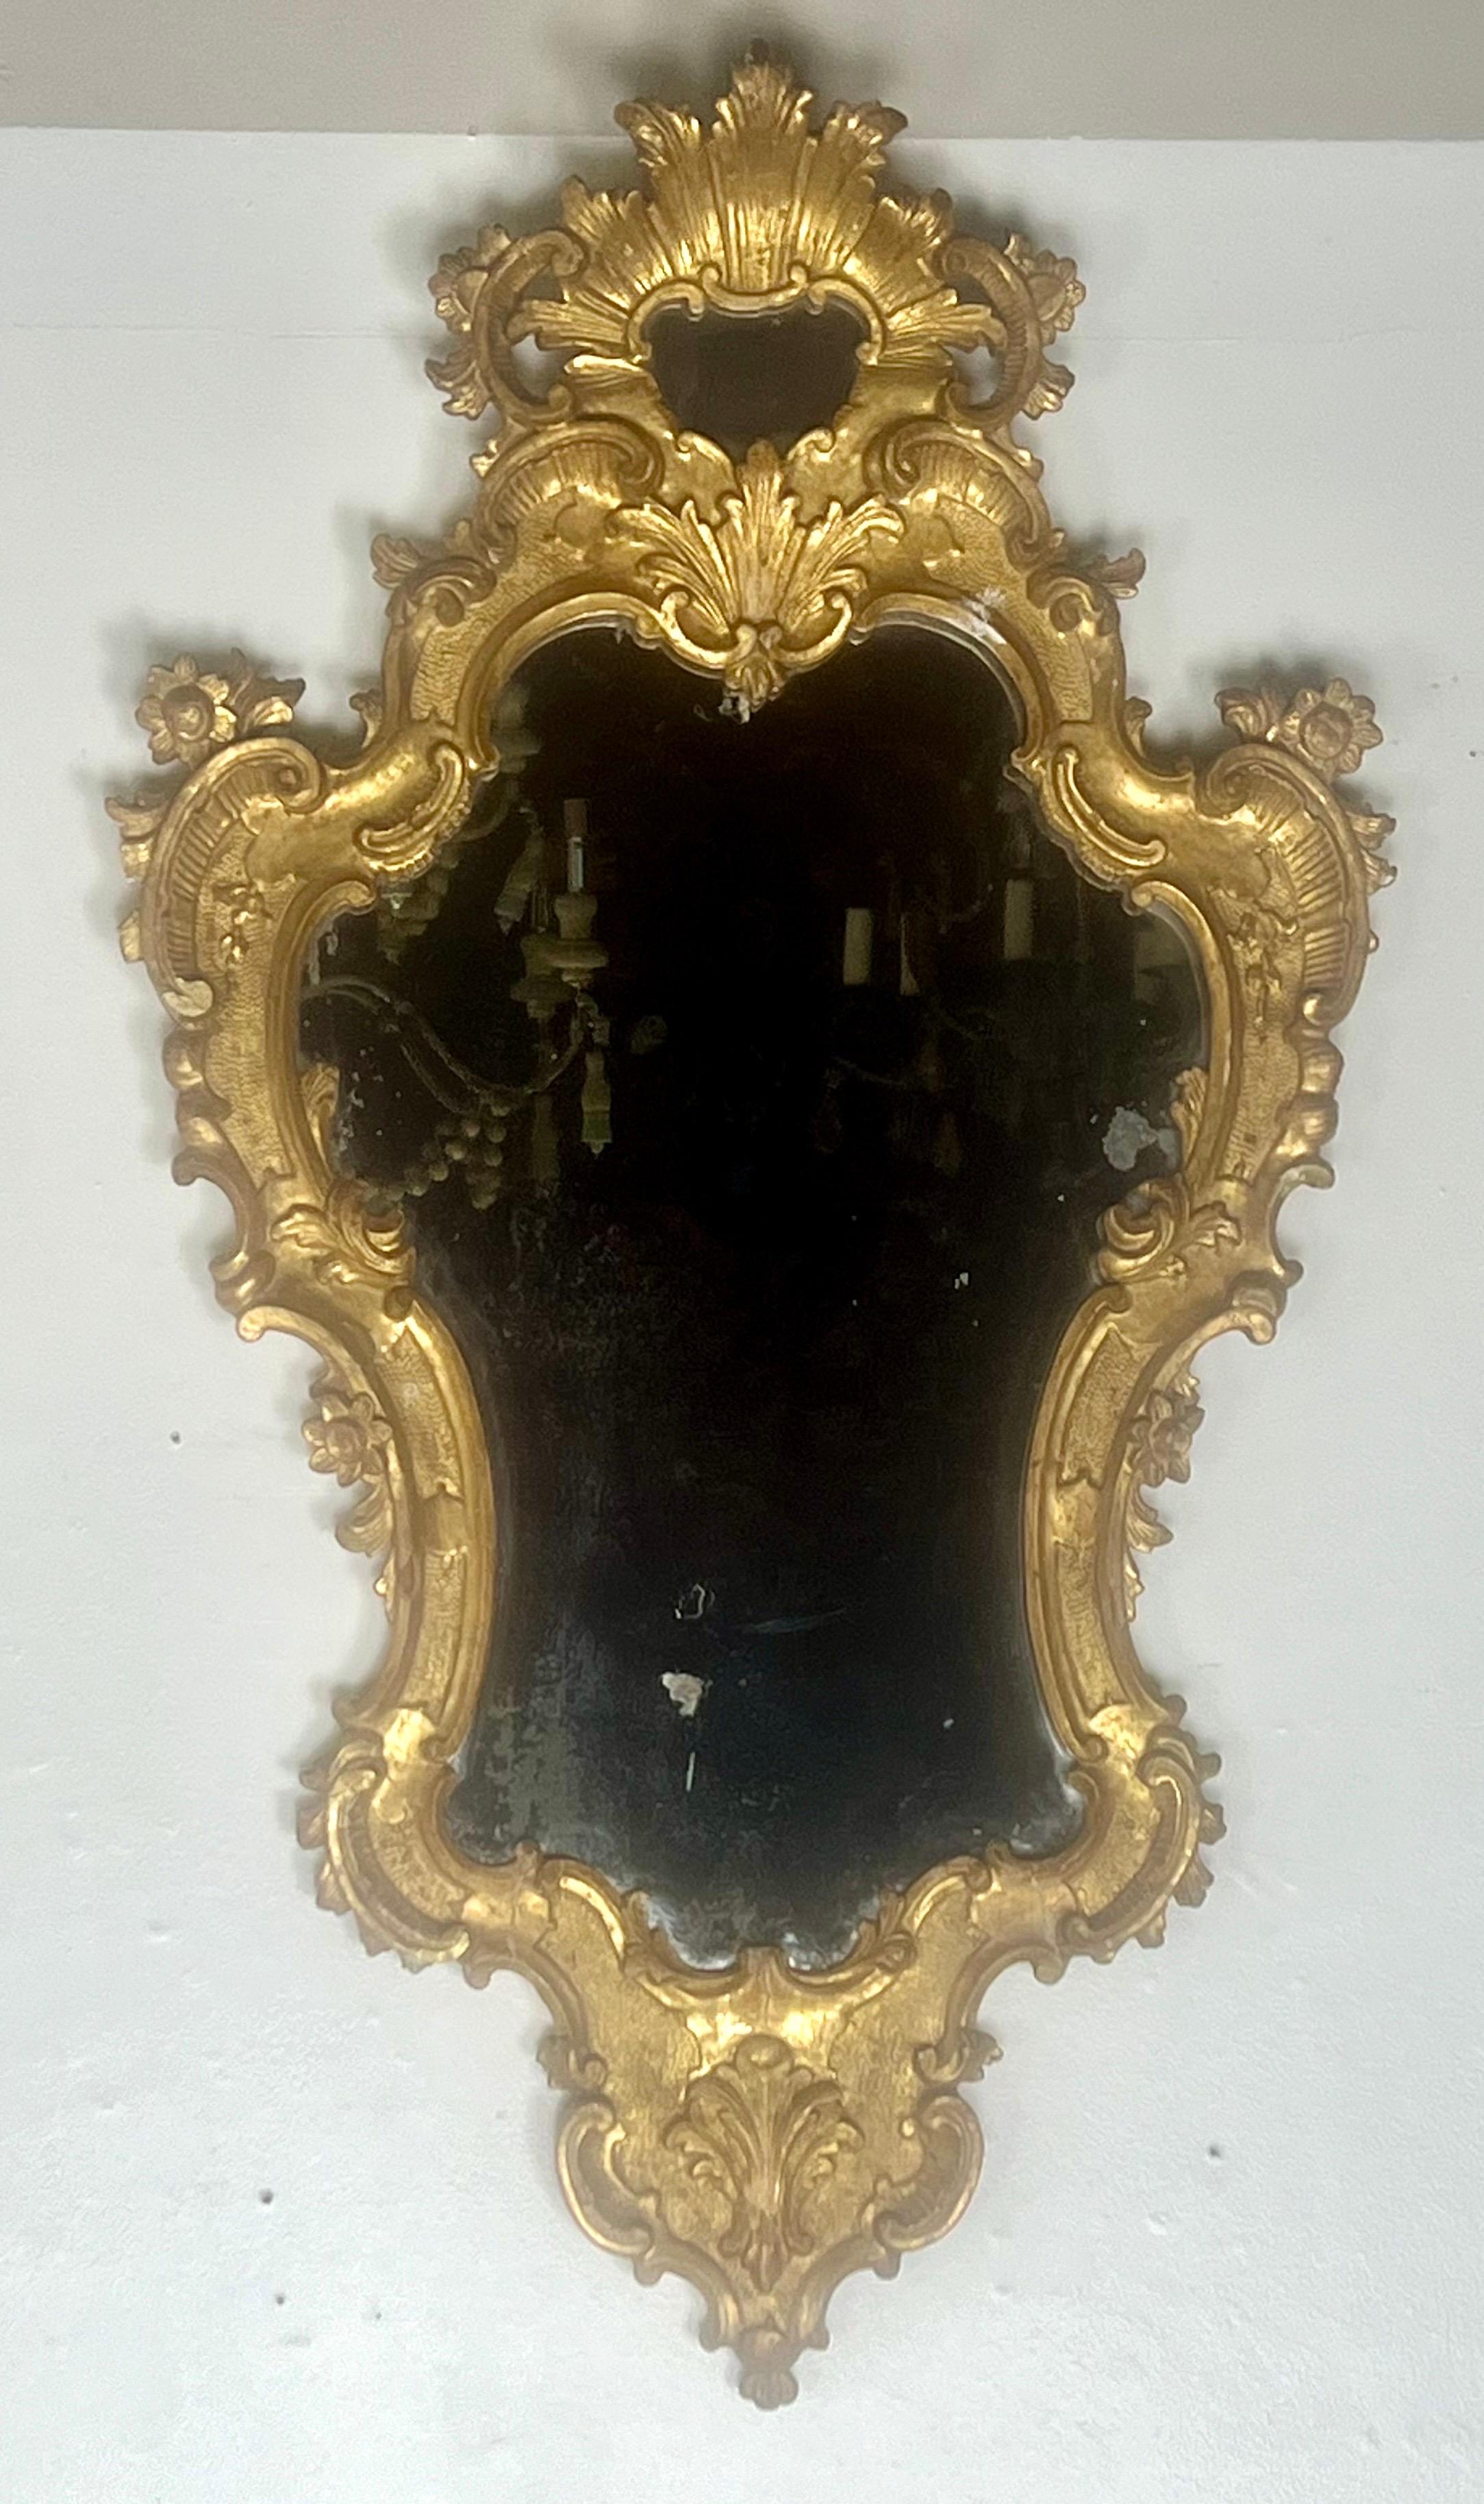 Pair of early 19th-century Rococo style gilt wood mirrors with elaborate frames. The frames have a rich, golden color with intricate details, featuring scrolls, acanthus leaves flowers and shells.  The actual mirror has a distressed finish and has